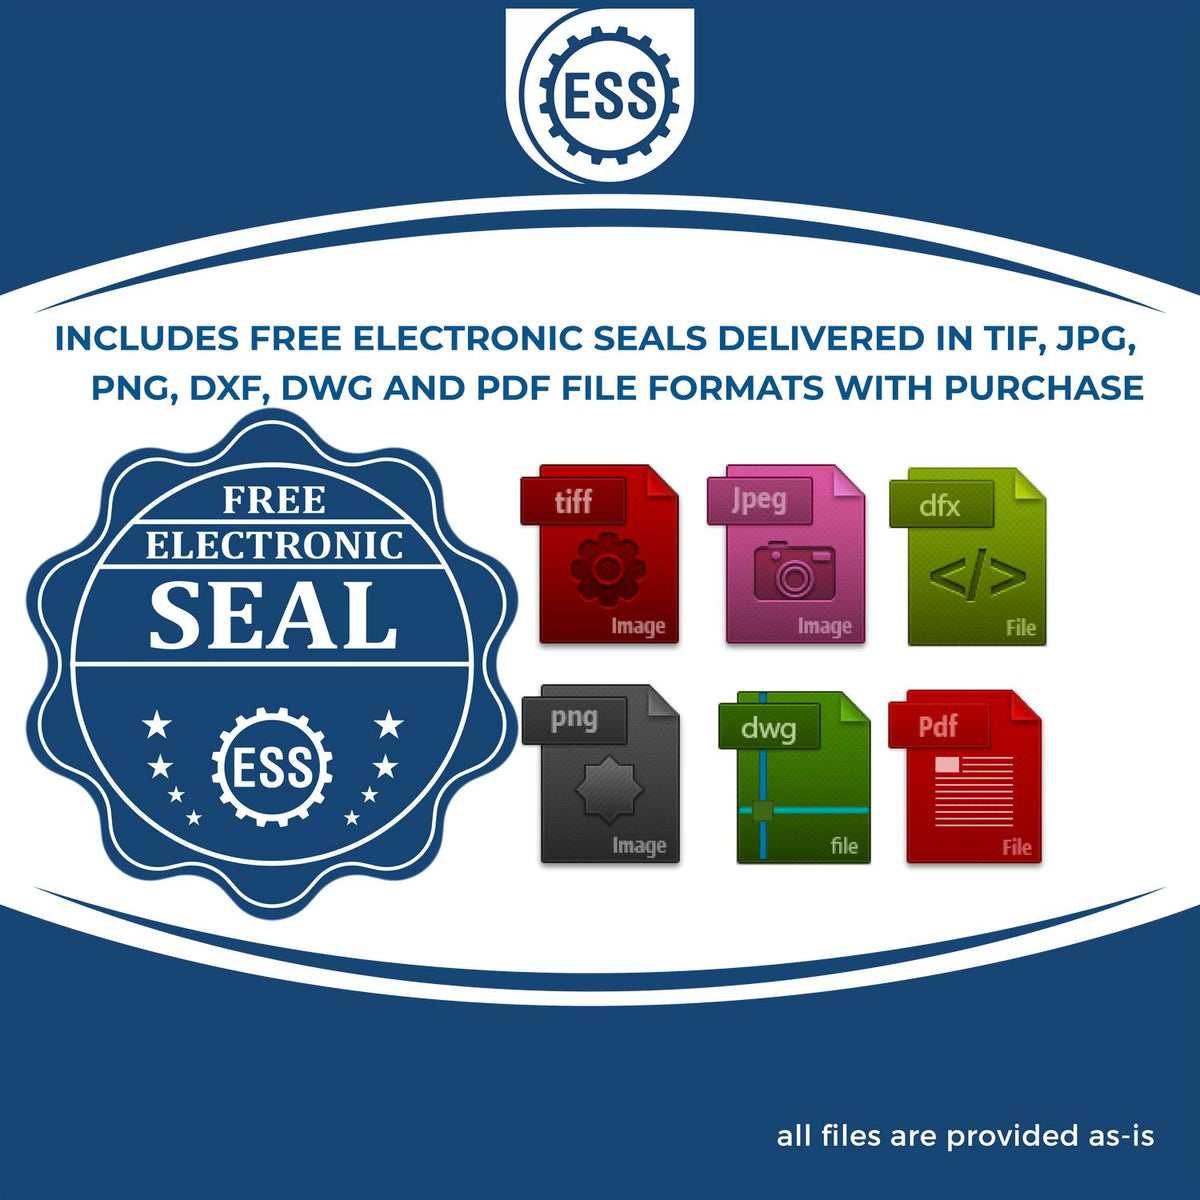 An infographic for the free electronic seal for the Long Reach Indiana Land Surveyor Seal illustrating the different file type icons such as DXF, DWG, TIF, JPG and PNG.